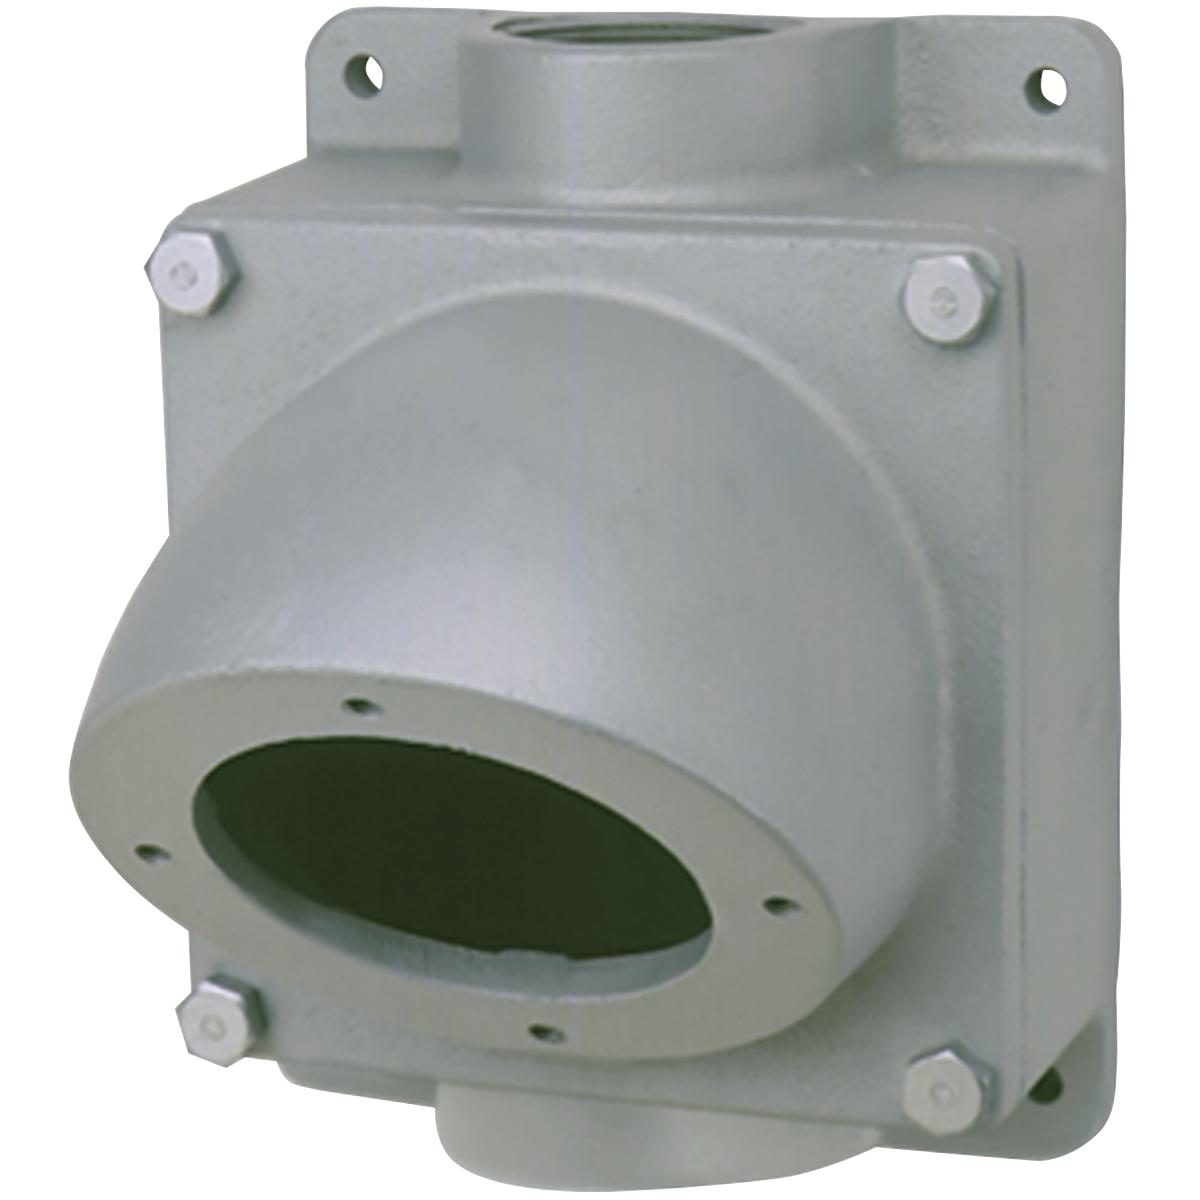 Hubbell VJC78 Versamate Series - 200A, 2-1/2" Feed-Thru Back Box  ; Exclusive “blind” receptacle mounting holes prevent moisture from entering box via thread cavities. ; Come with a green grounding screw. ; For use with Versamate Series Receptacles.